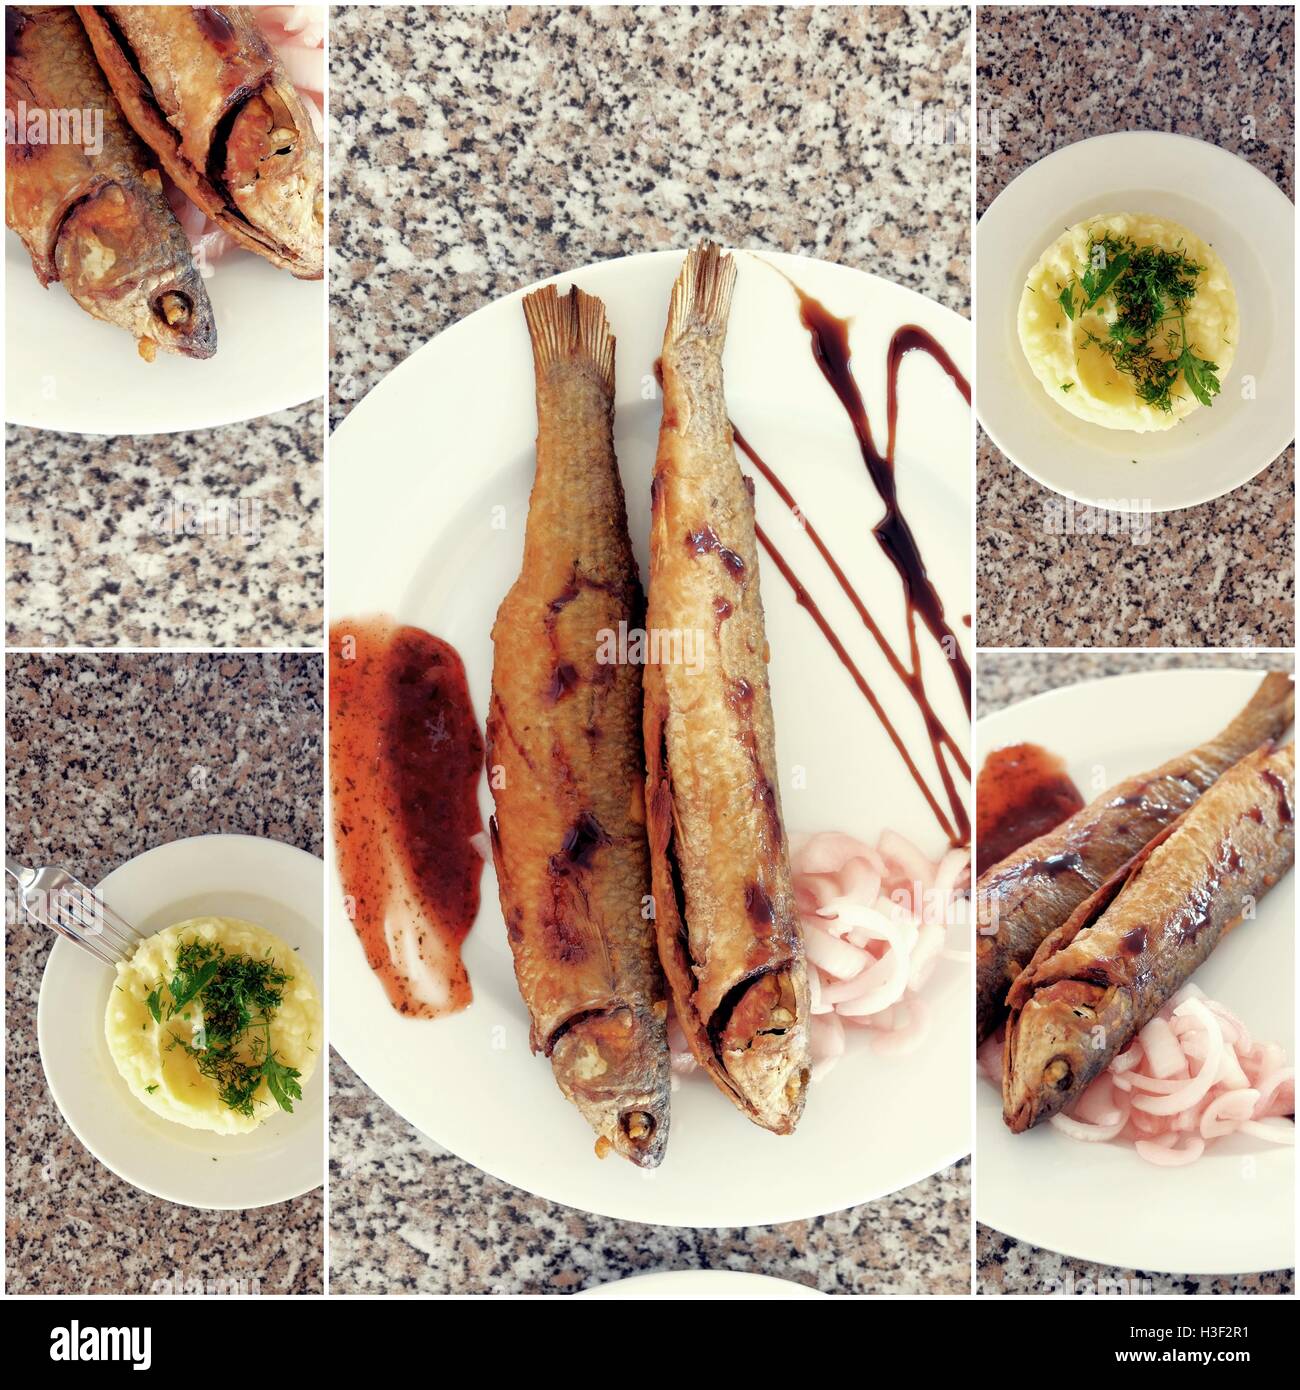 Collection of fried Fish and puree on Table Photo Collage of Toned Images Stock Photo